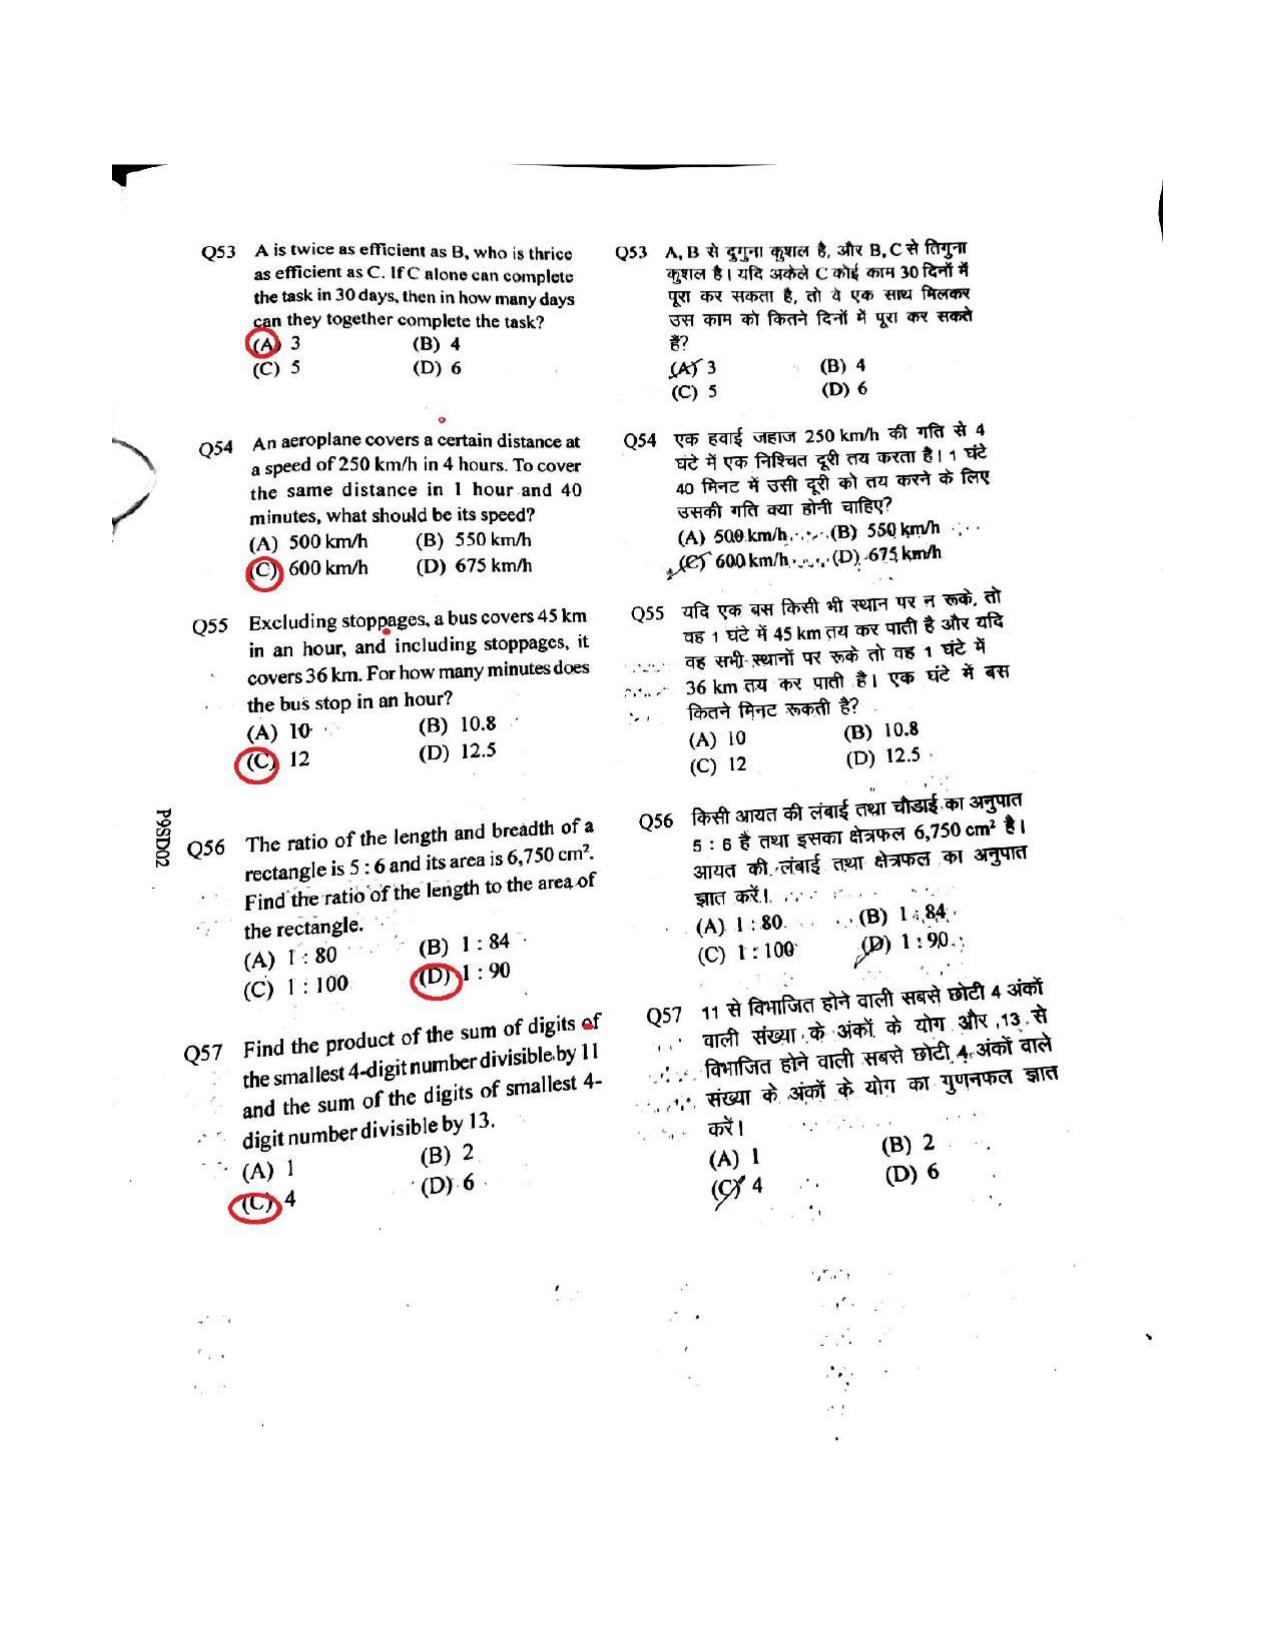 UPPRPB Police Constable Question Papers Jan 27, 2019 Shift 2 - Page 4